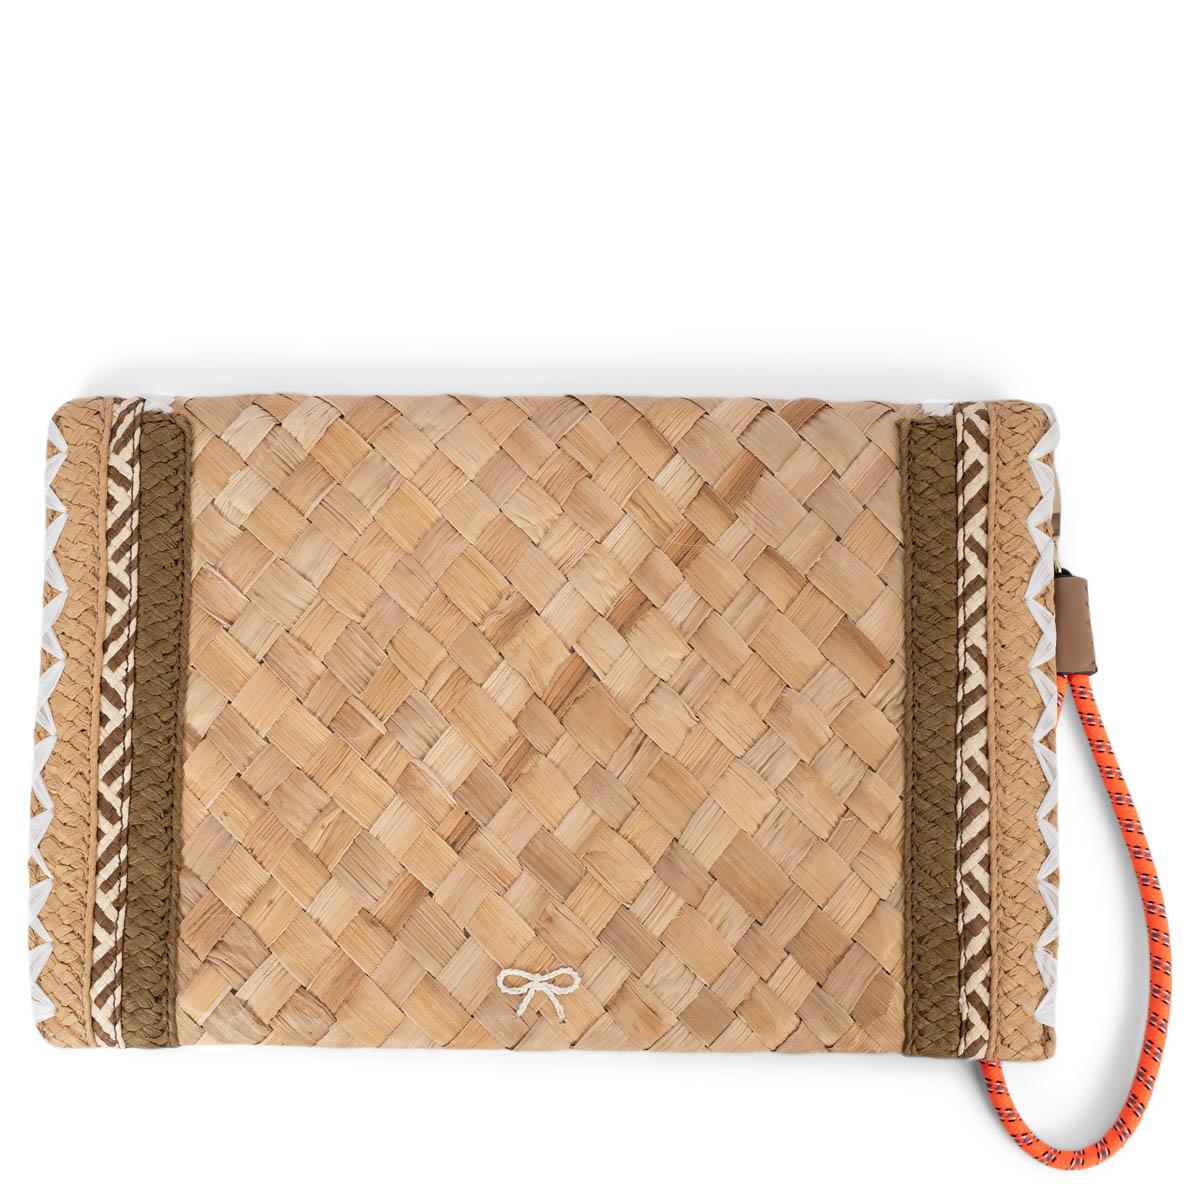 100% authentic Anya Hindmarch Smiley clutch in beige raffia with details in white, brown and neon orange. The design opens with a magnetic button and is lined in beige logo nylon. Comes with detachable handle. Has been carried and is in excellent